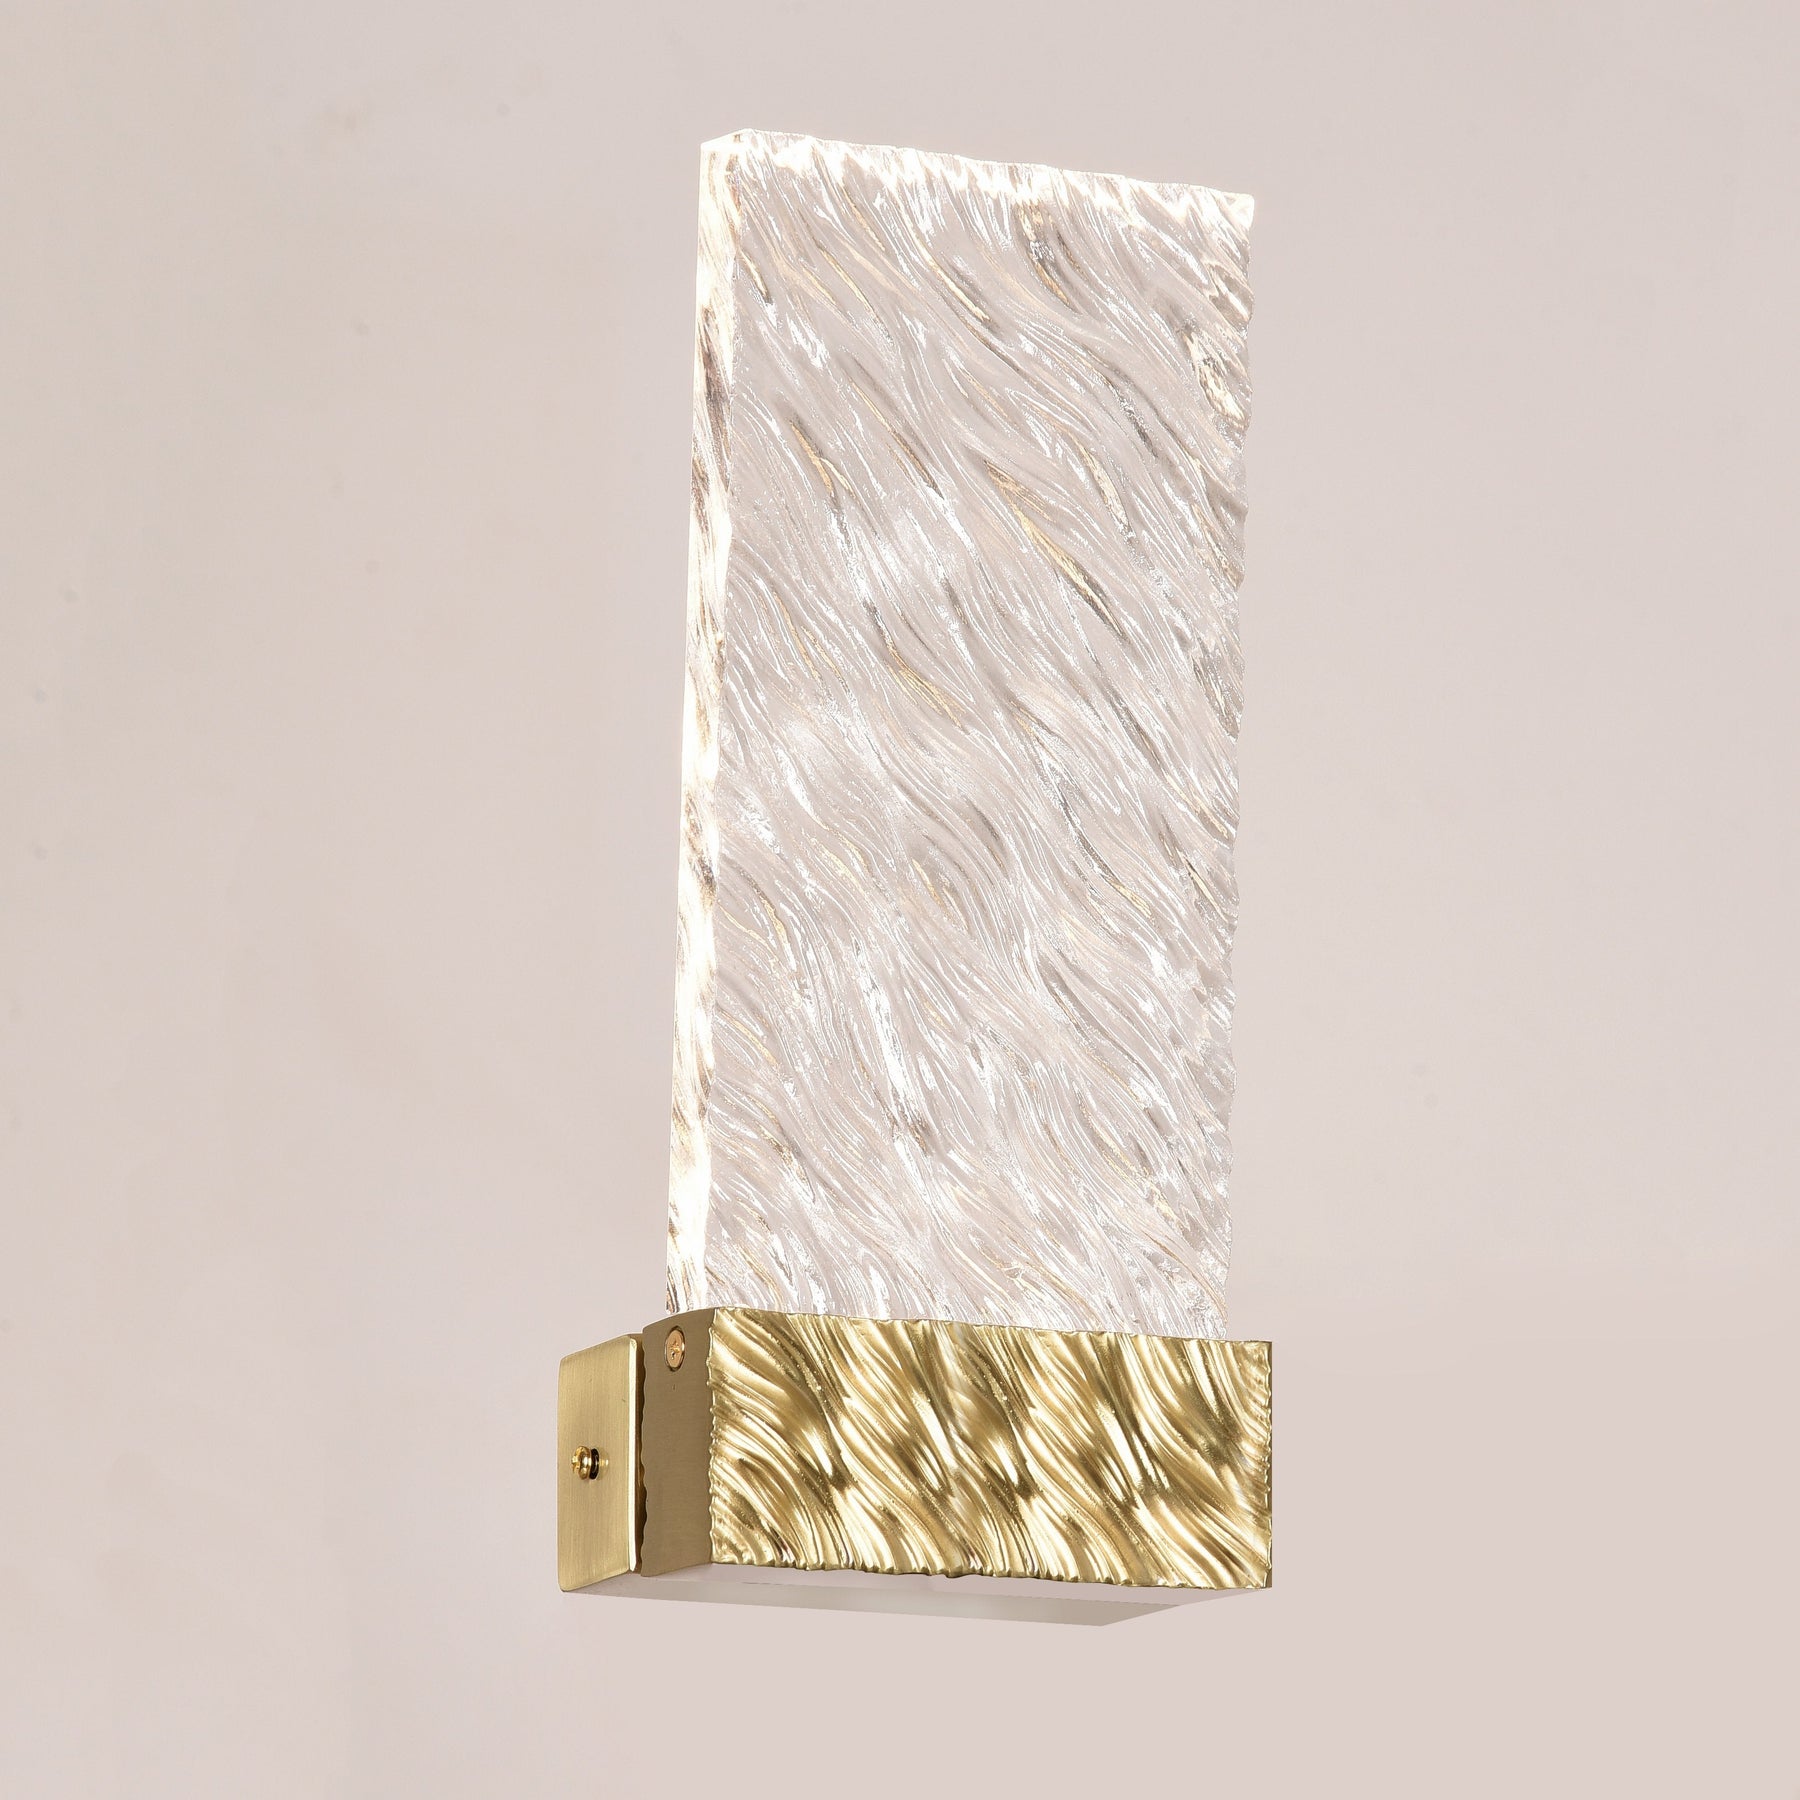 Joseph LED Luxury Wall Sconce, Indoor Wall Lamp Fixture